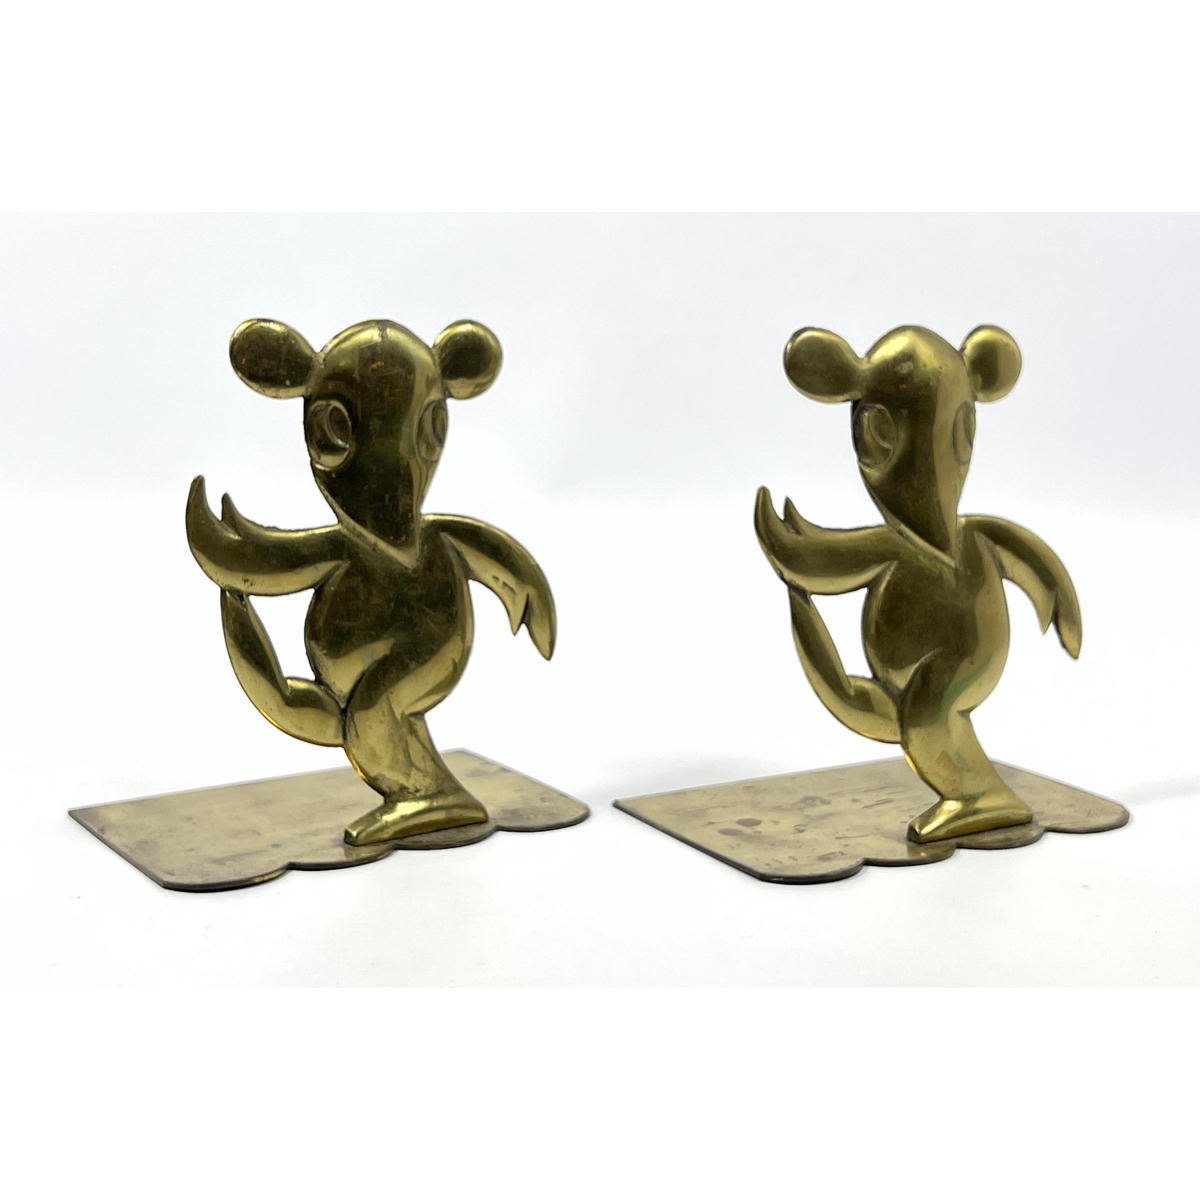 Attributed to Hagenauer brass bookends 2ff721